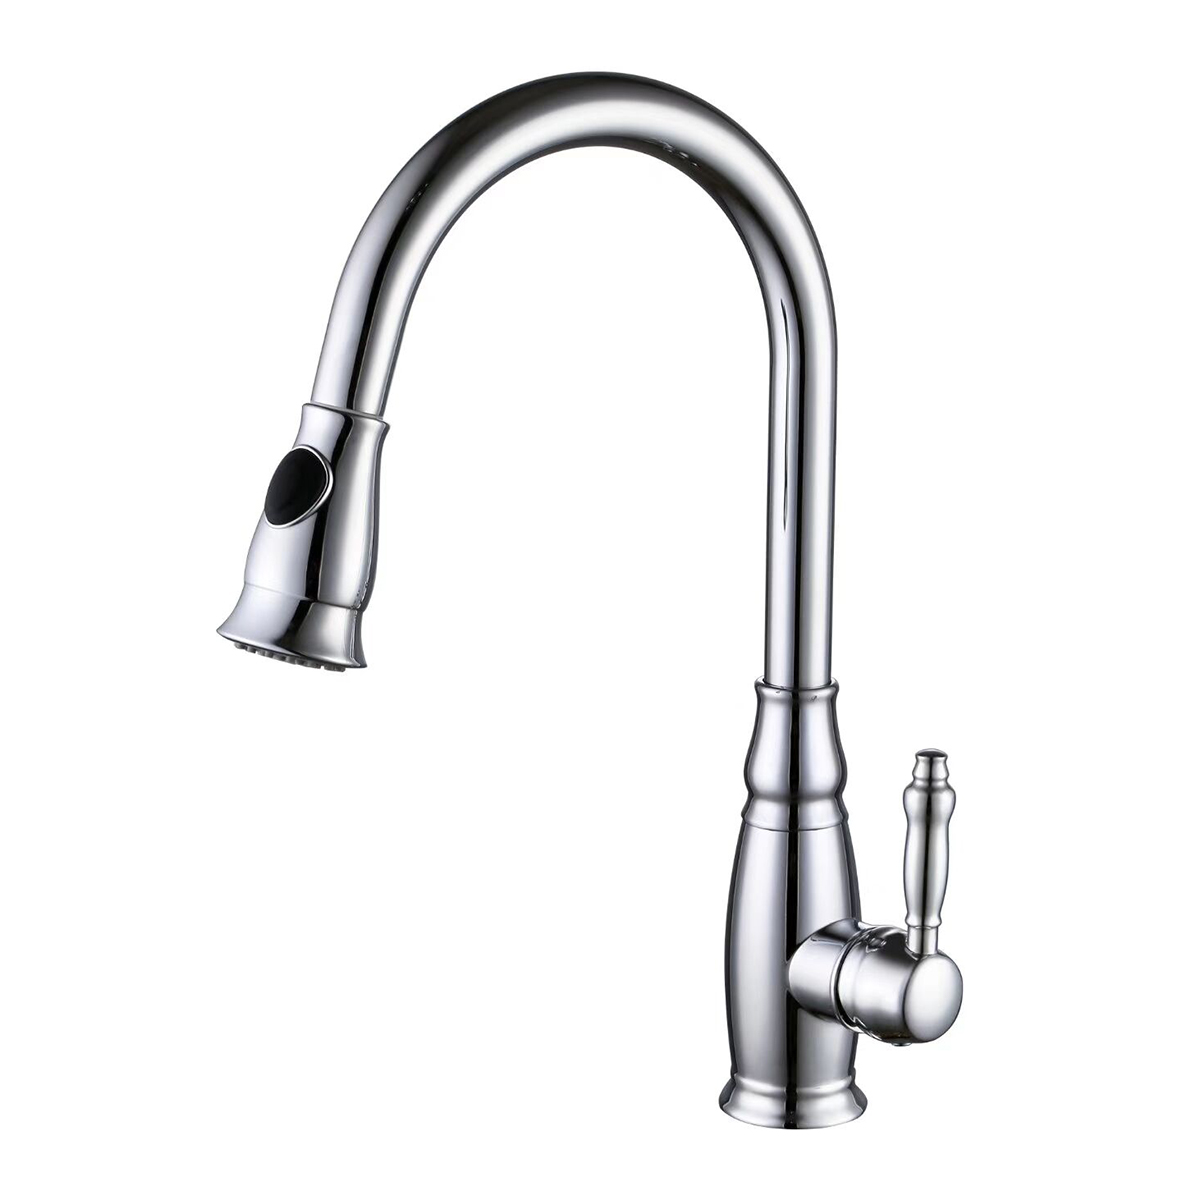 Aquacubic cUPC 304 Stainless Steel Flexible Hose Single Lever Pull Down Kitchen Sink Faucet with 3 Modes Sprayer